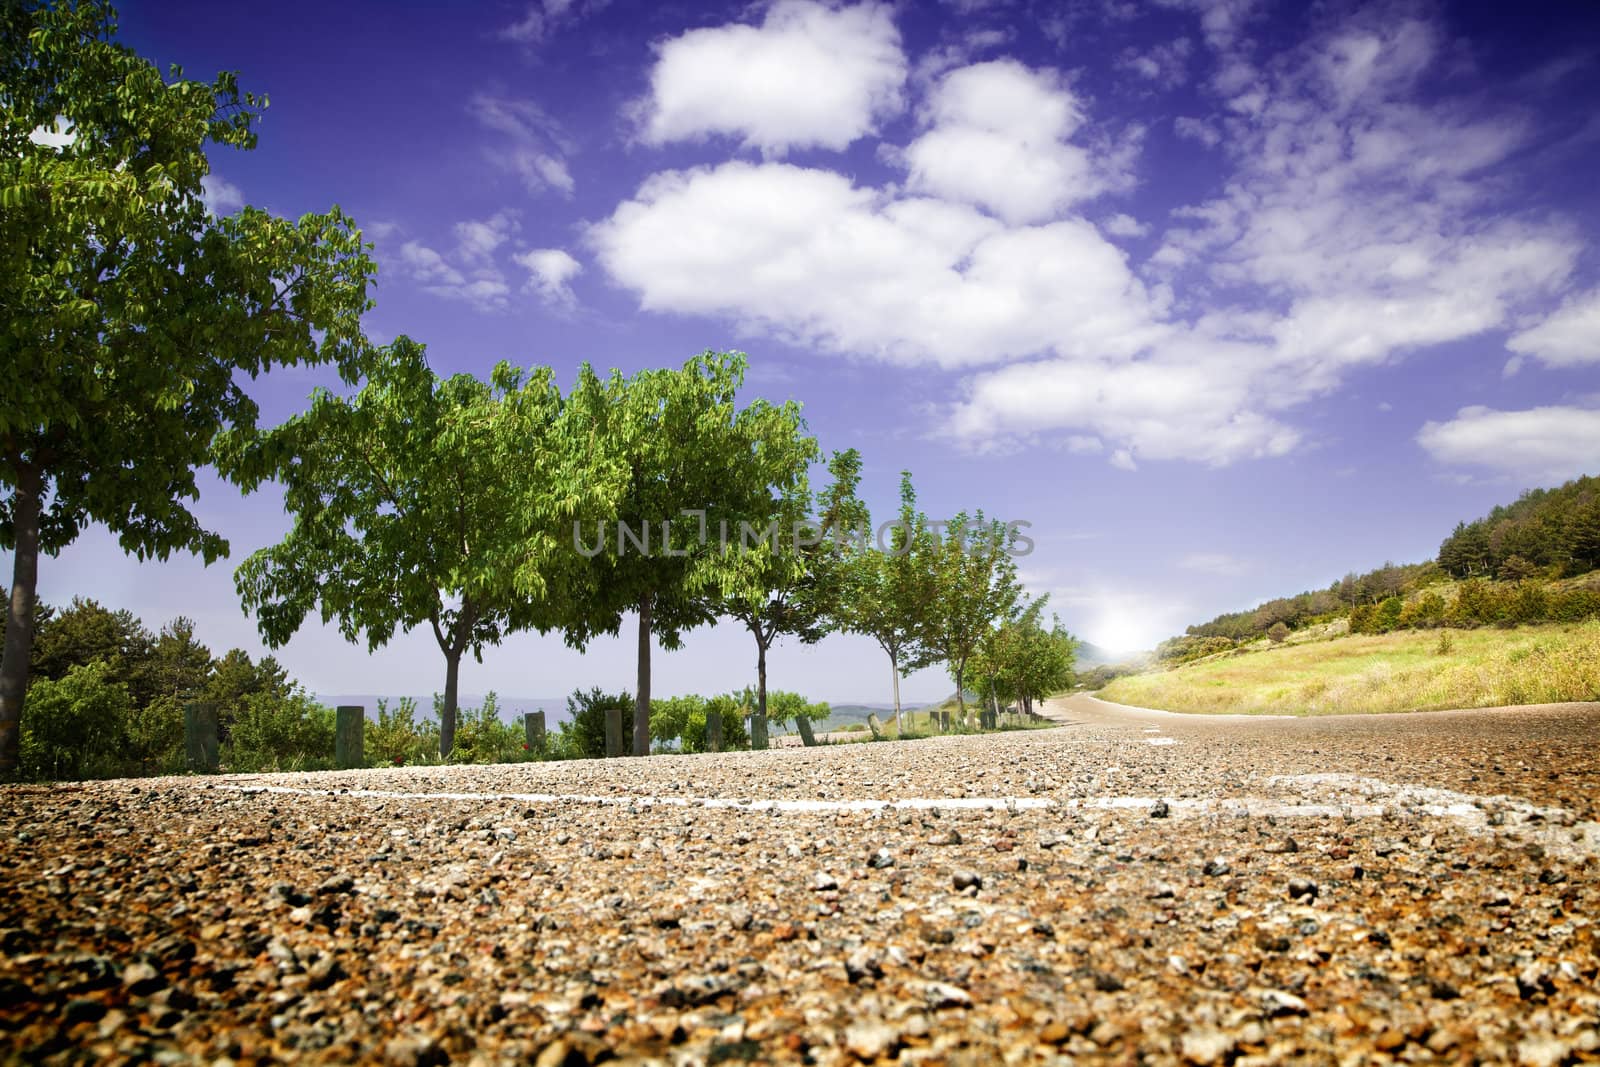 Suggestive point of view of landscape with road and trees